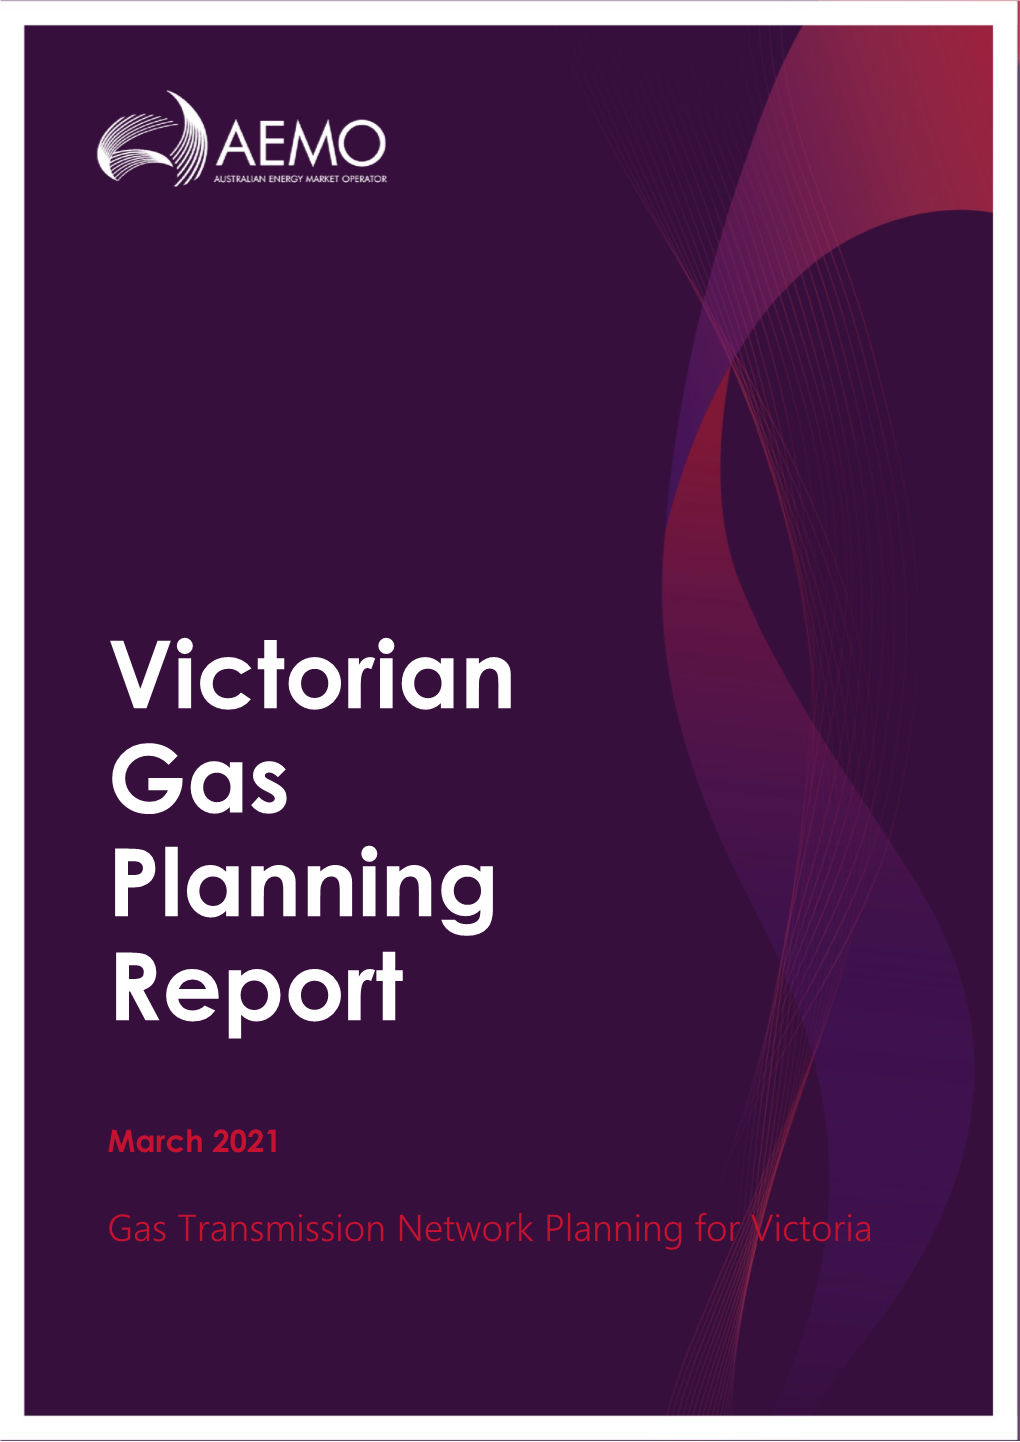 Victorian Gas Planning Report (March 2021) in Accordance with Rule 323 of the National Gas Rules